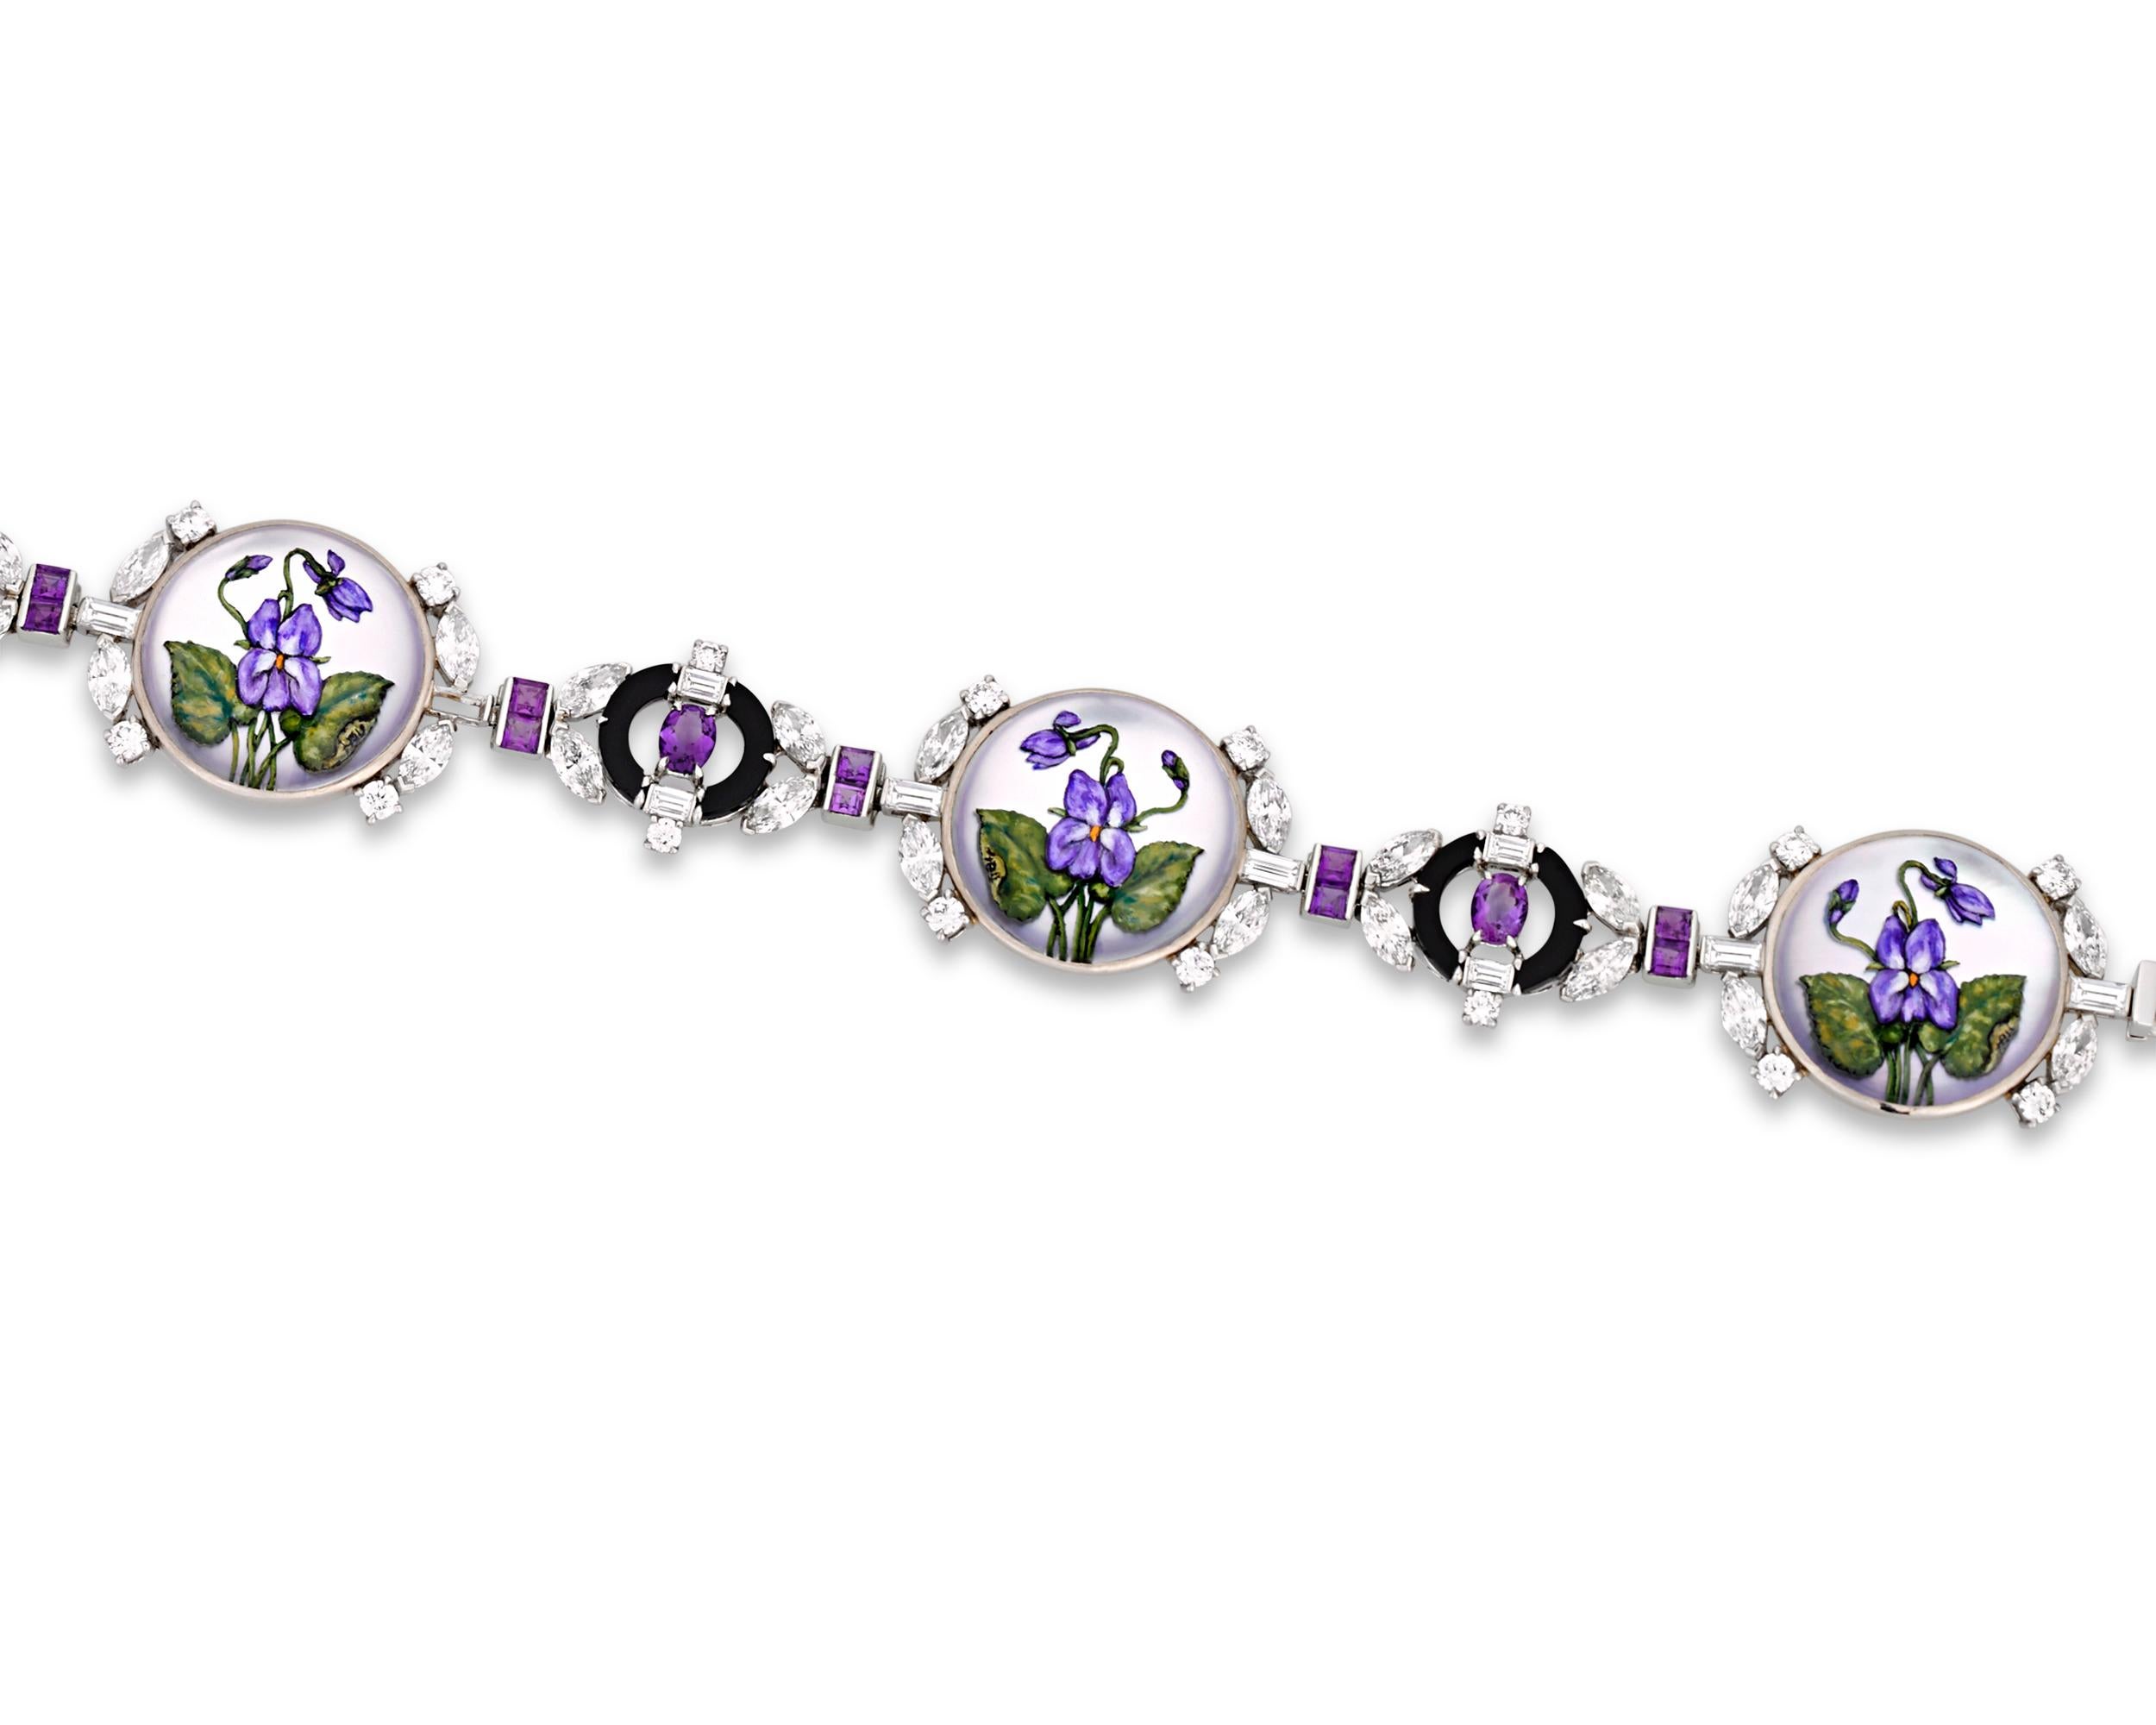 Beautifully hand-painted violets are visible through the Essex crystals set in this elegant bracelet by Raymond Yard. This jewelry creation is executed in the 